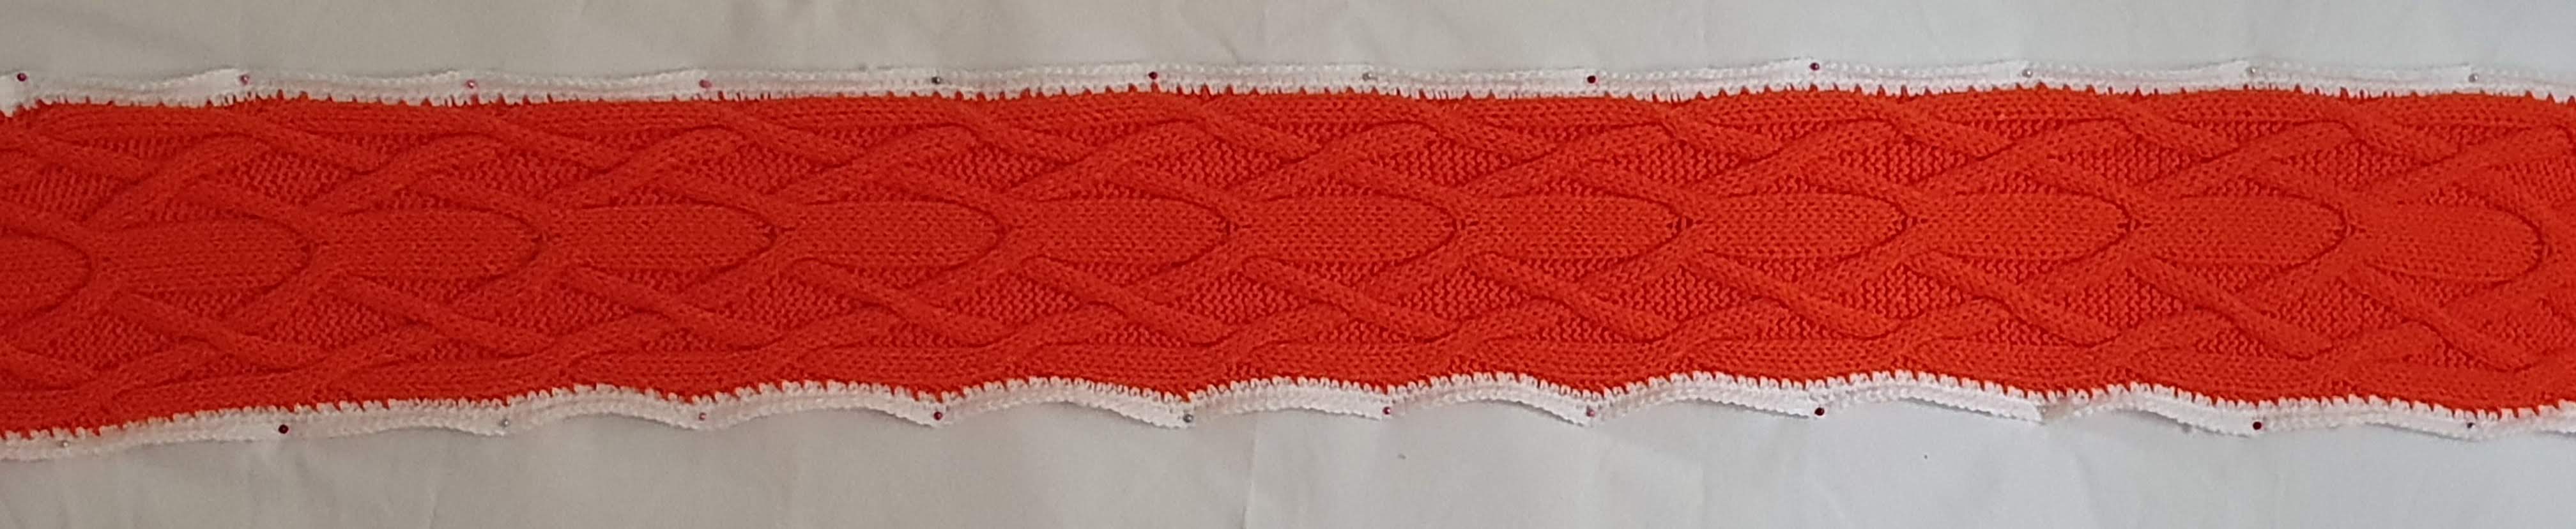 Orange with a central band that forks into two and then crosses on the outside edge